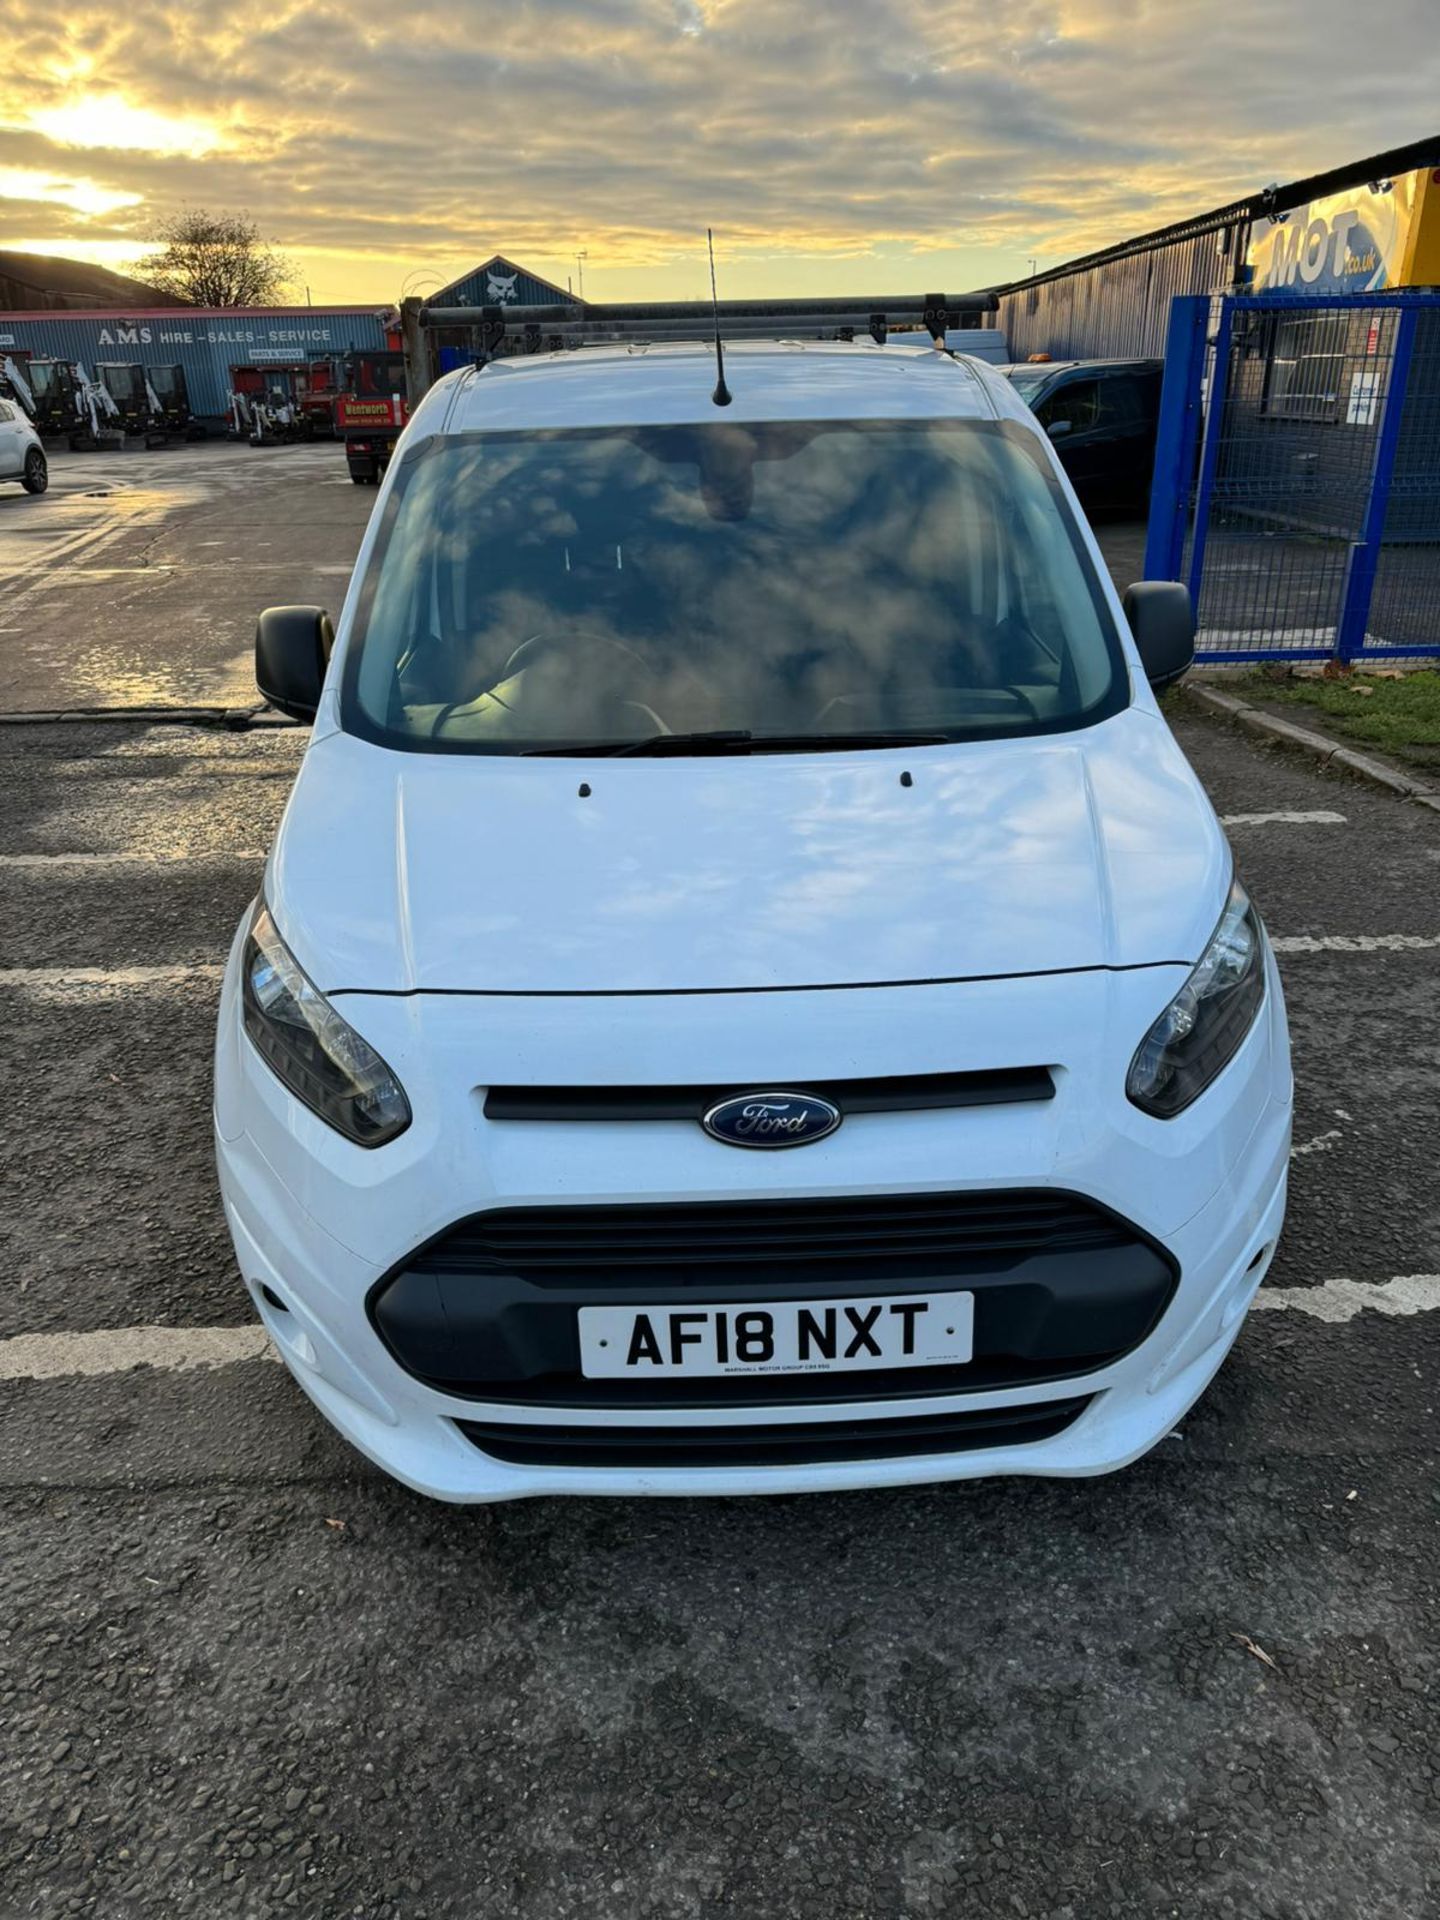 2018 18 FORD TRANSIT CONNECT TREND PAENL VAN - 128K MILES - EURO 6 - 3 SEATS - LWB - ROOF RACK - Image 7 of 11